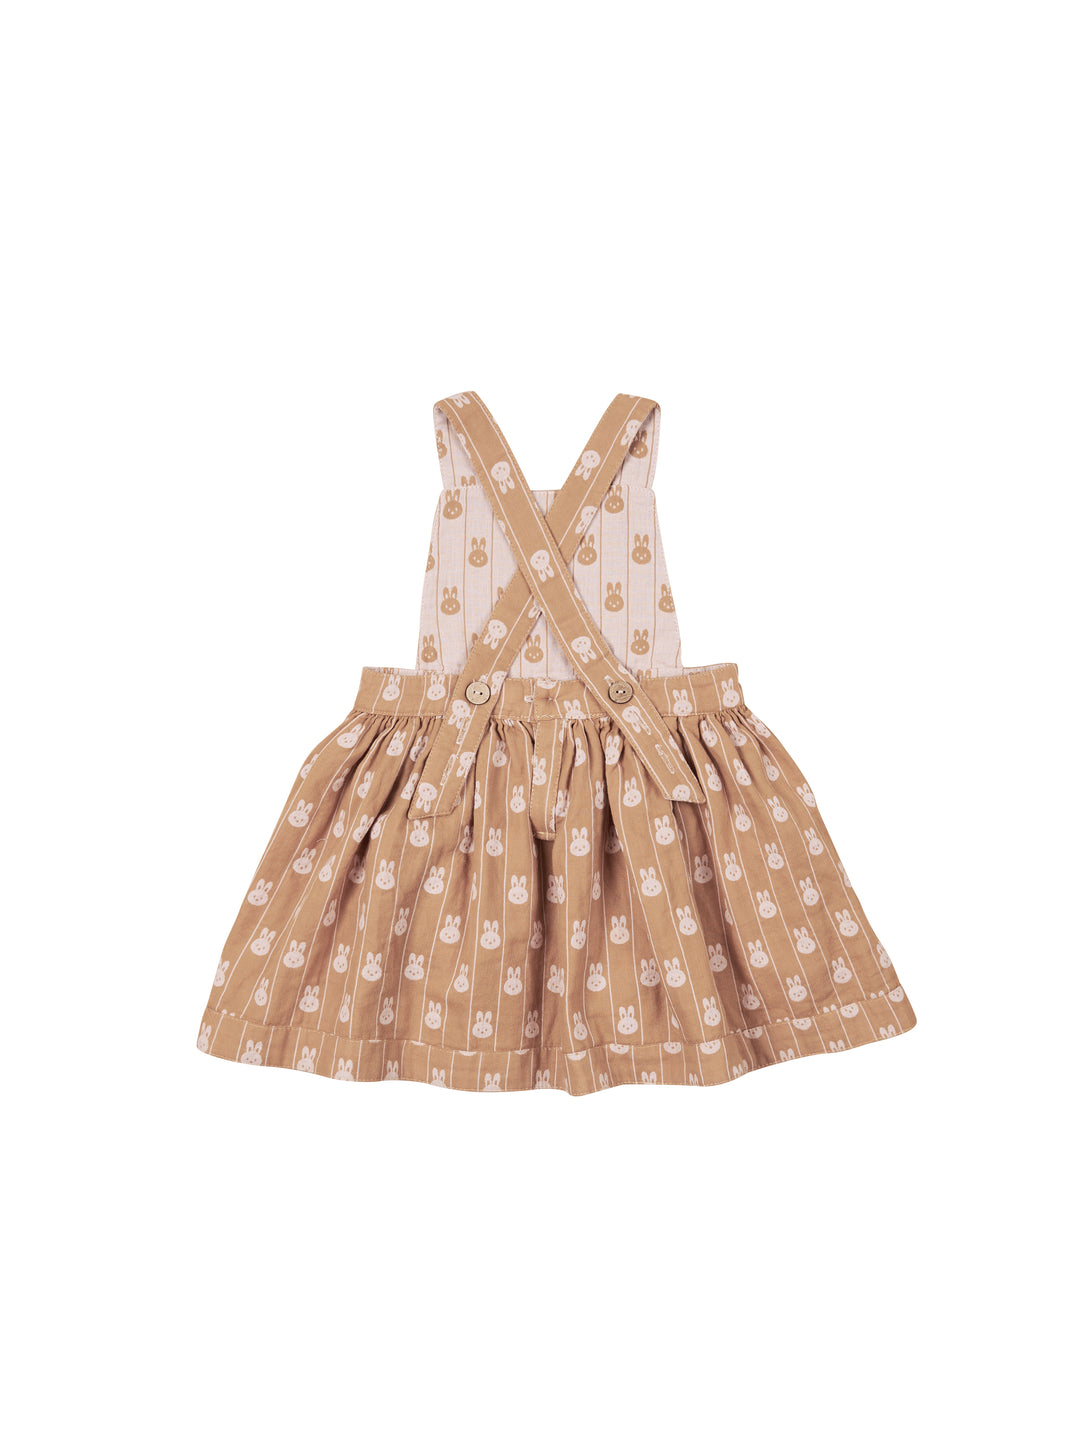 Huxbaby Bunny Stripe Reversible Pinafore - Rose + Biscuit